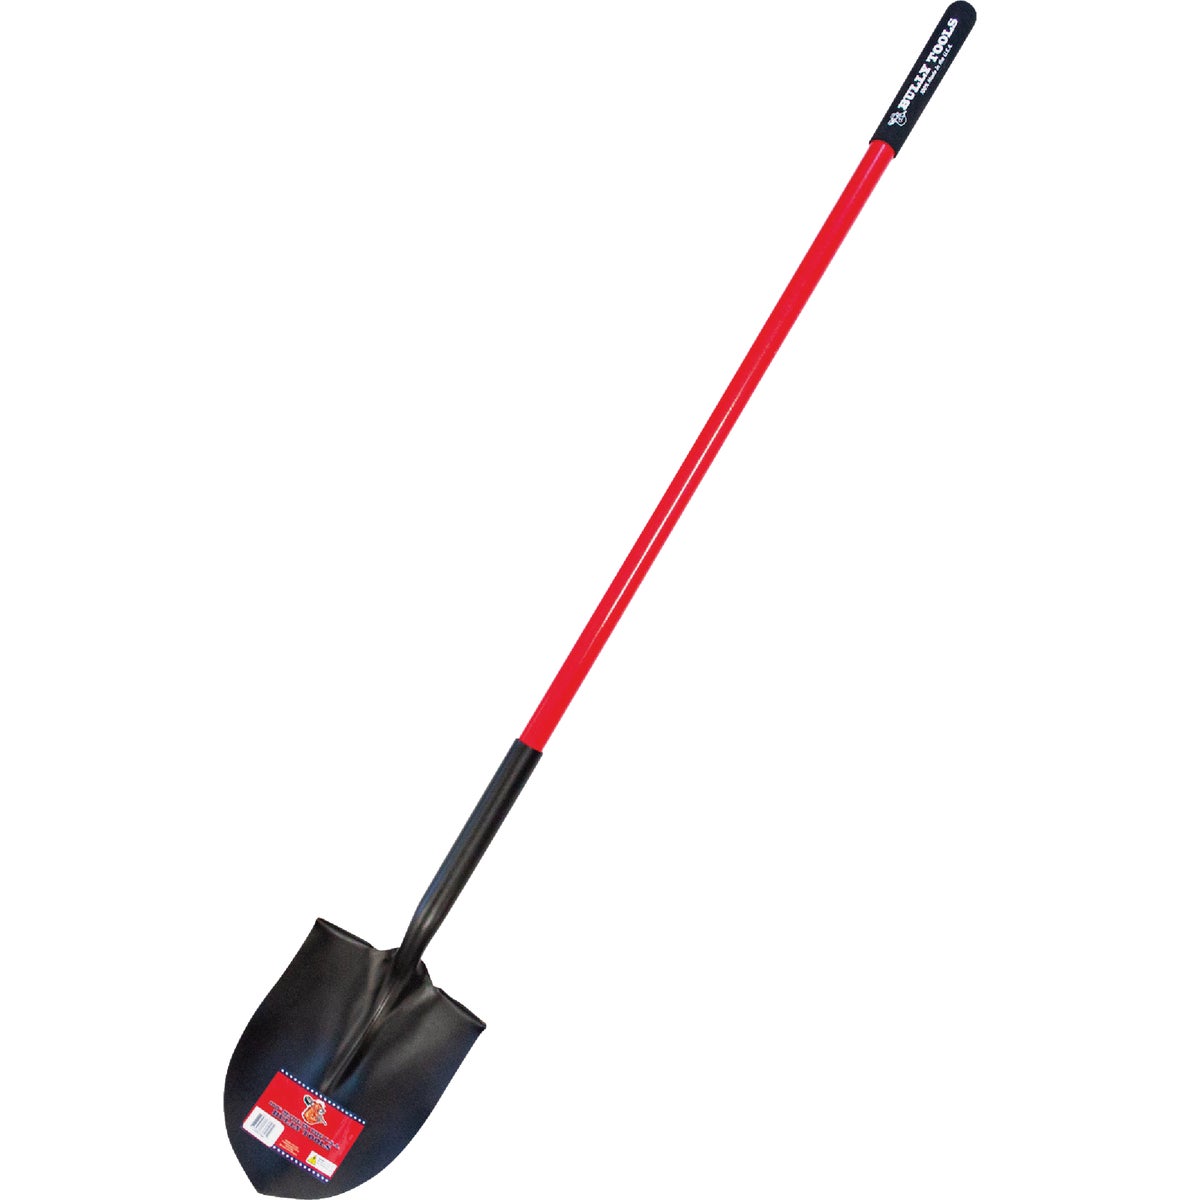 Item 700970, The Bully Tools 14-Gauge Round Point Shovel is the perfect shovel used for 